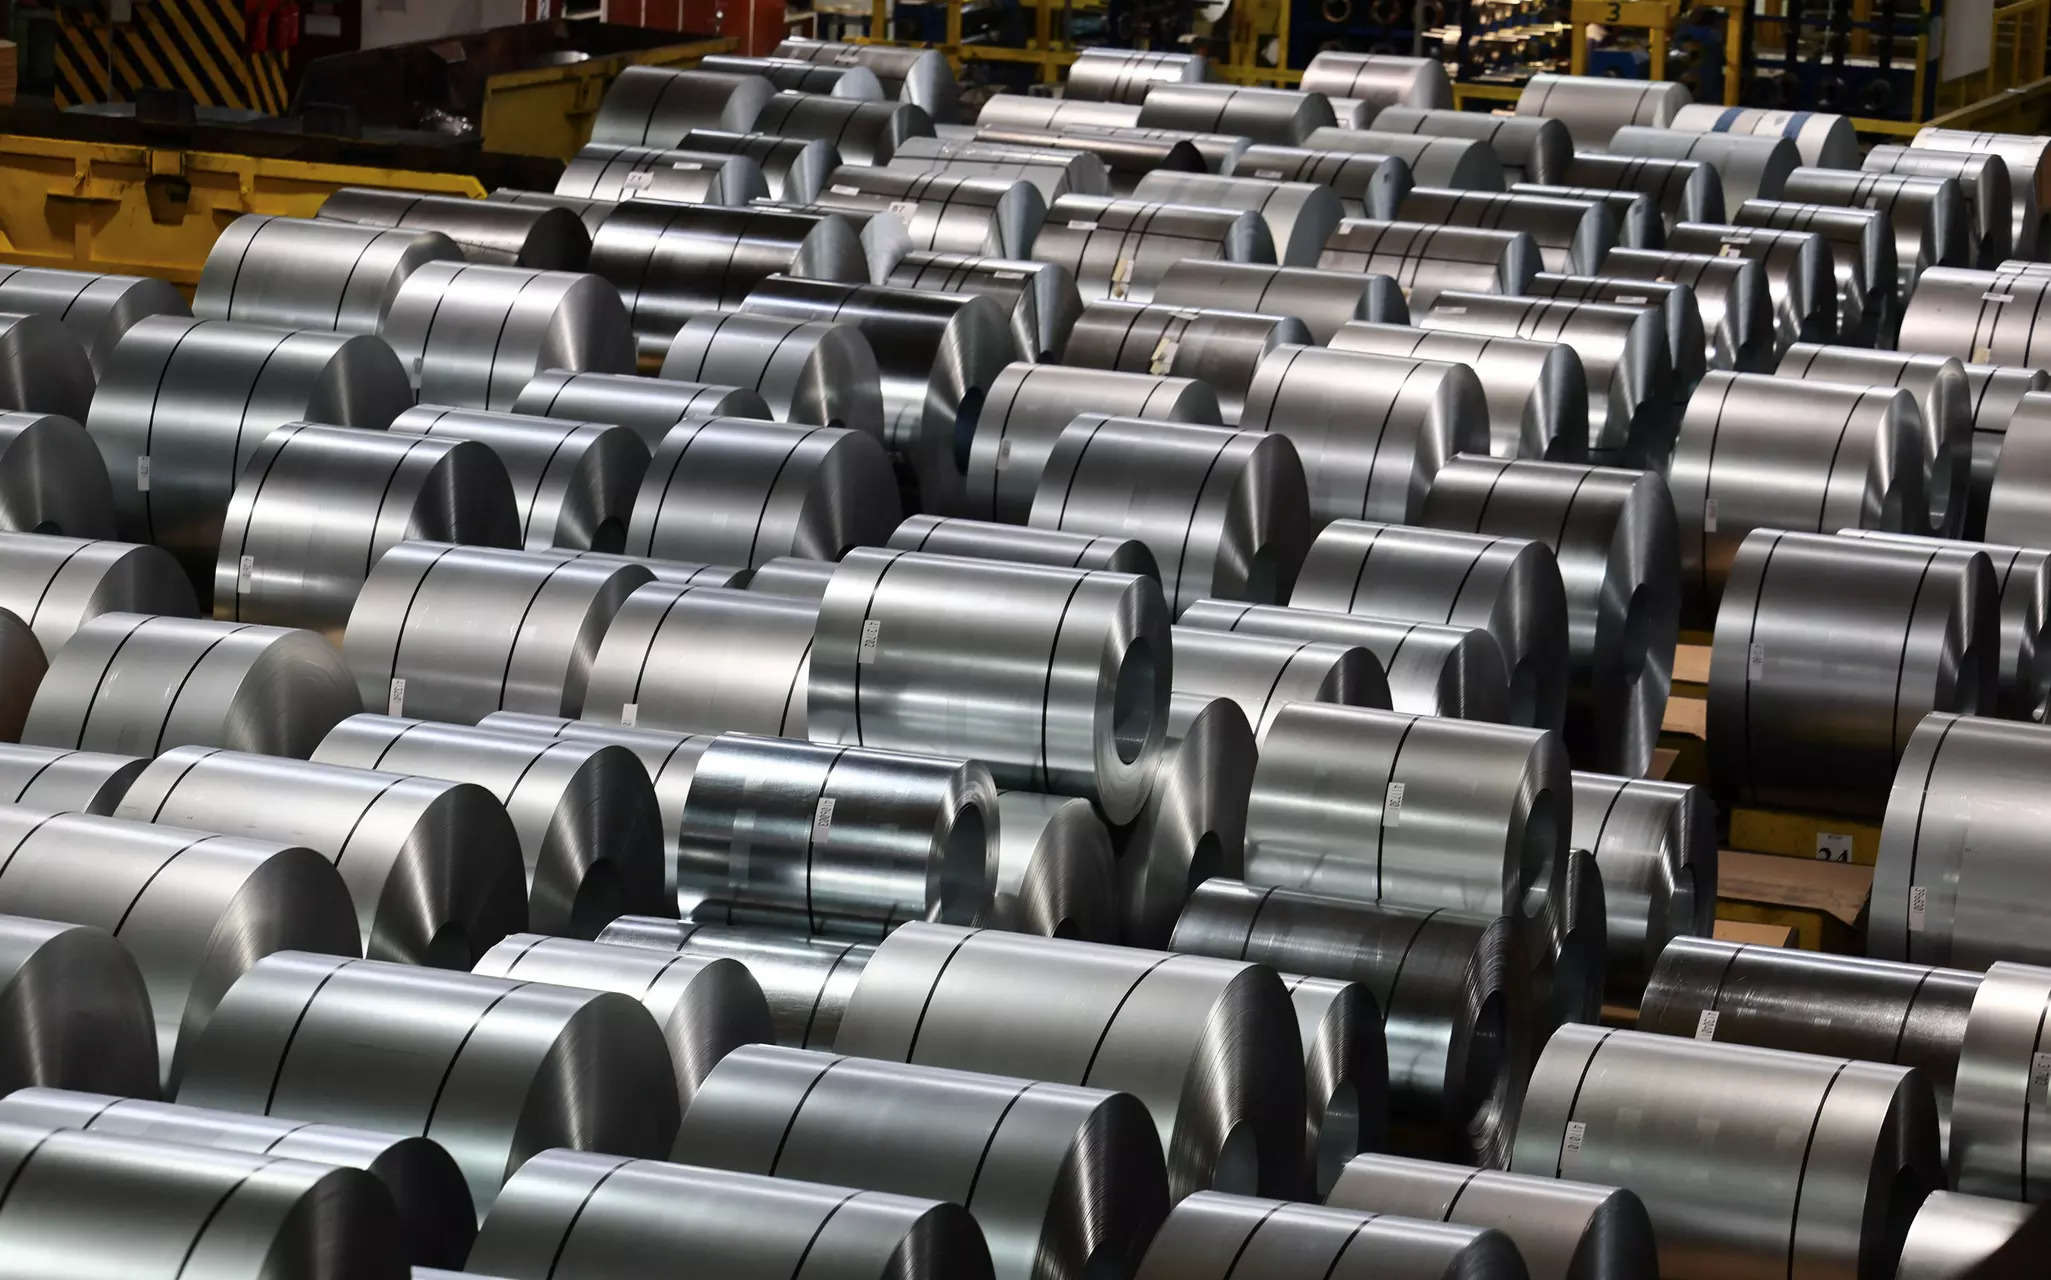 Steel production in India hits new heights, grows 14.3% in current fiscal: Steel ministry – ET Auto